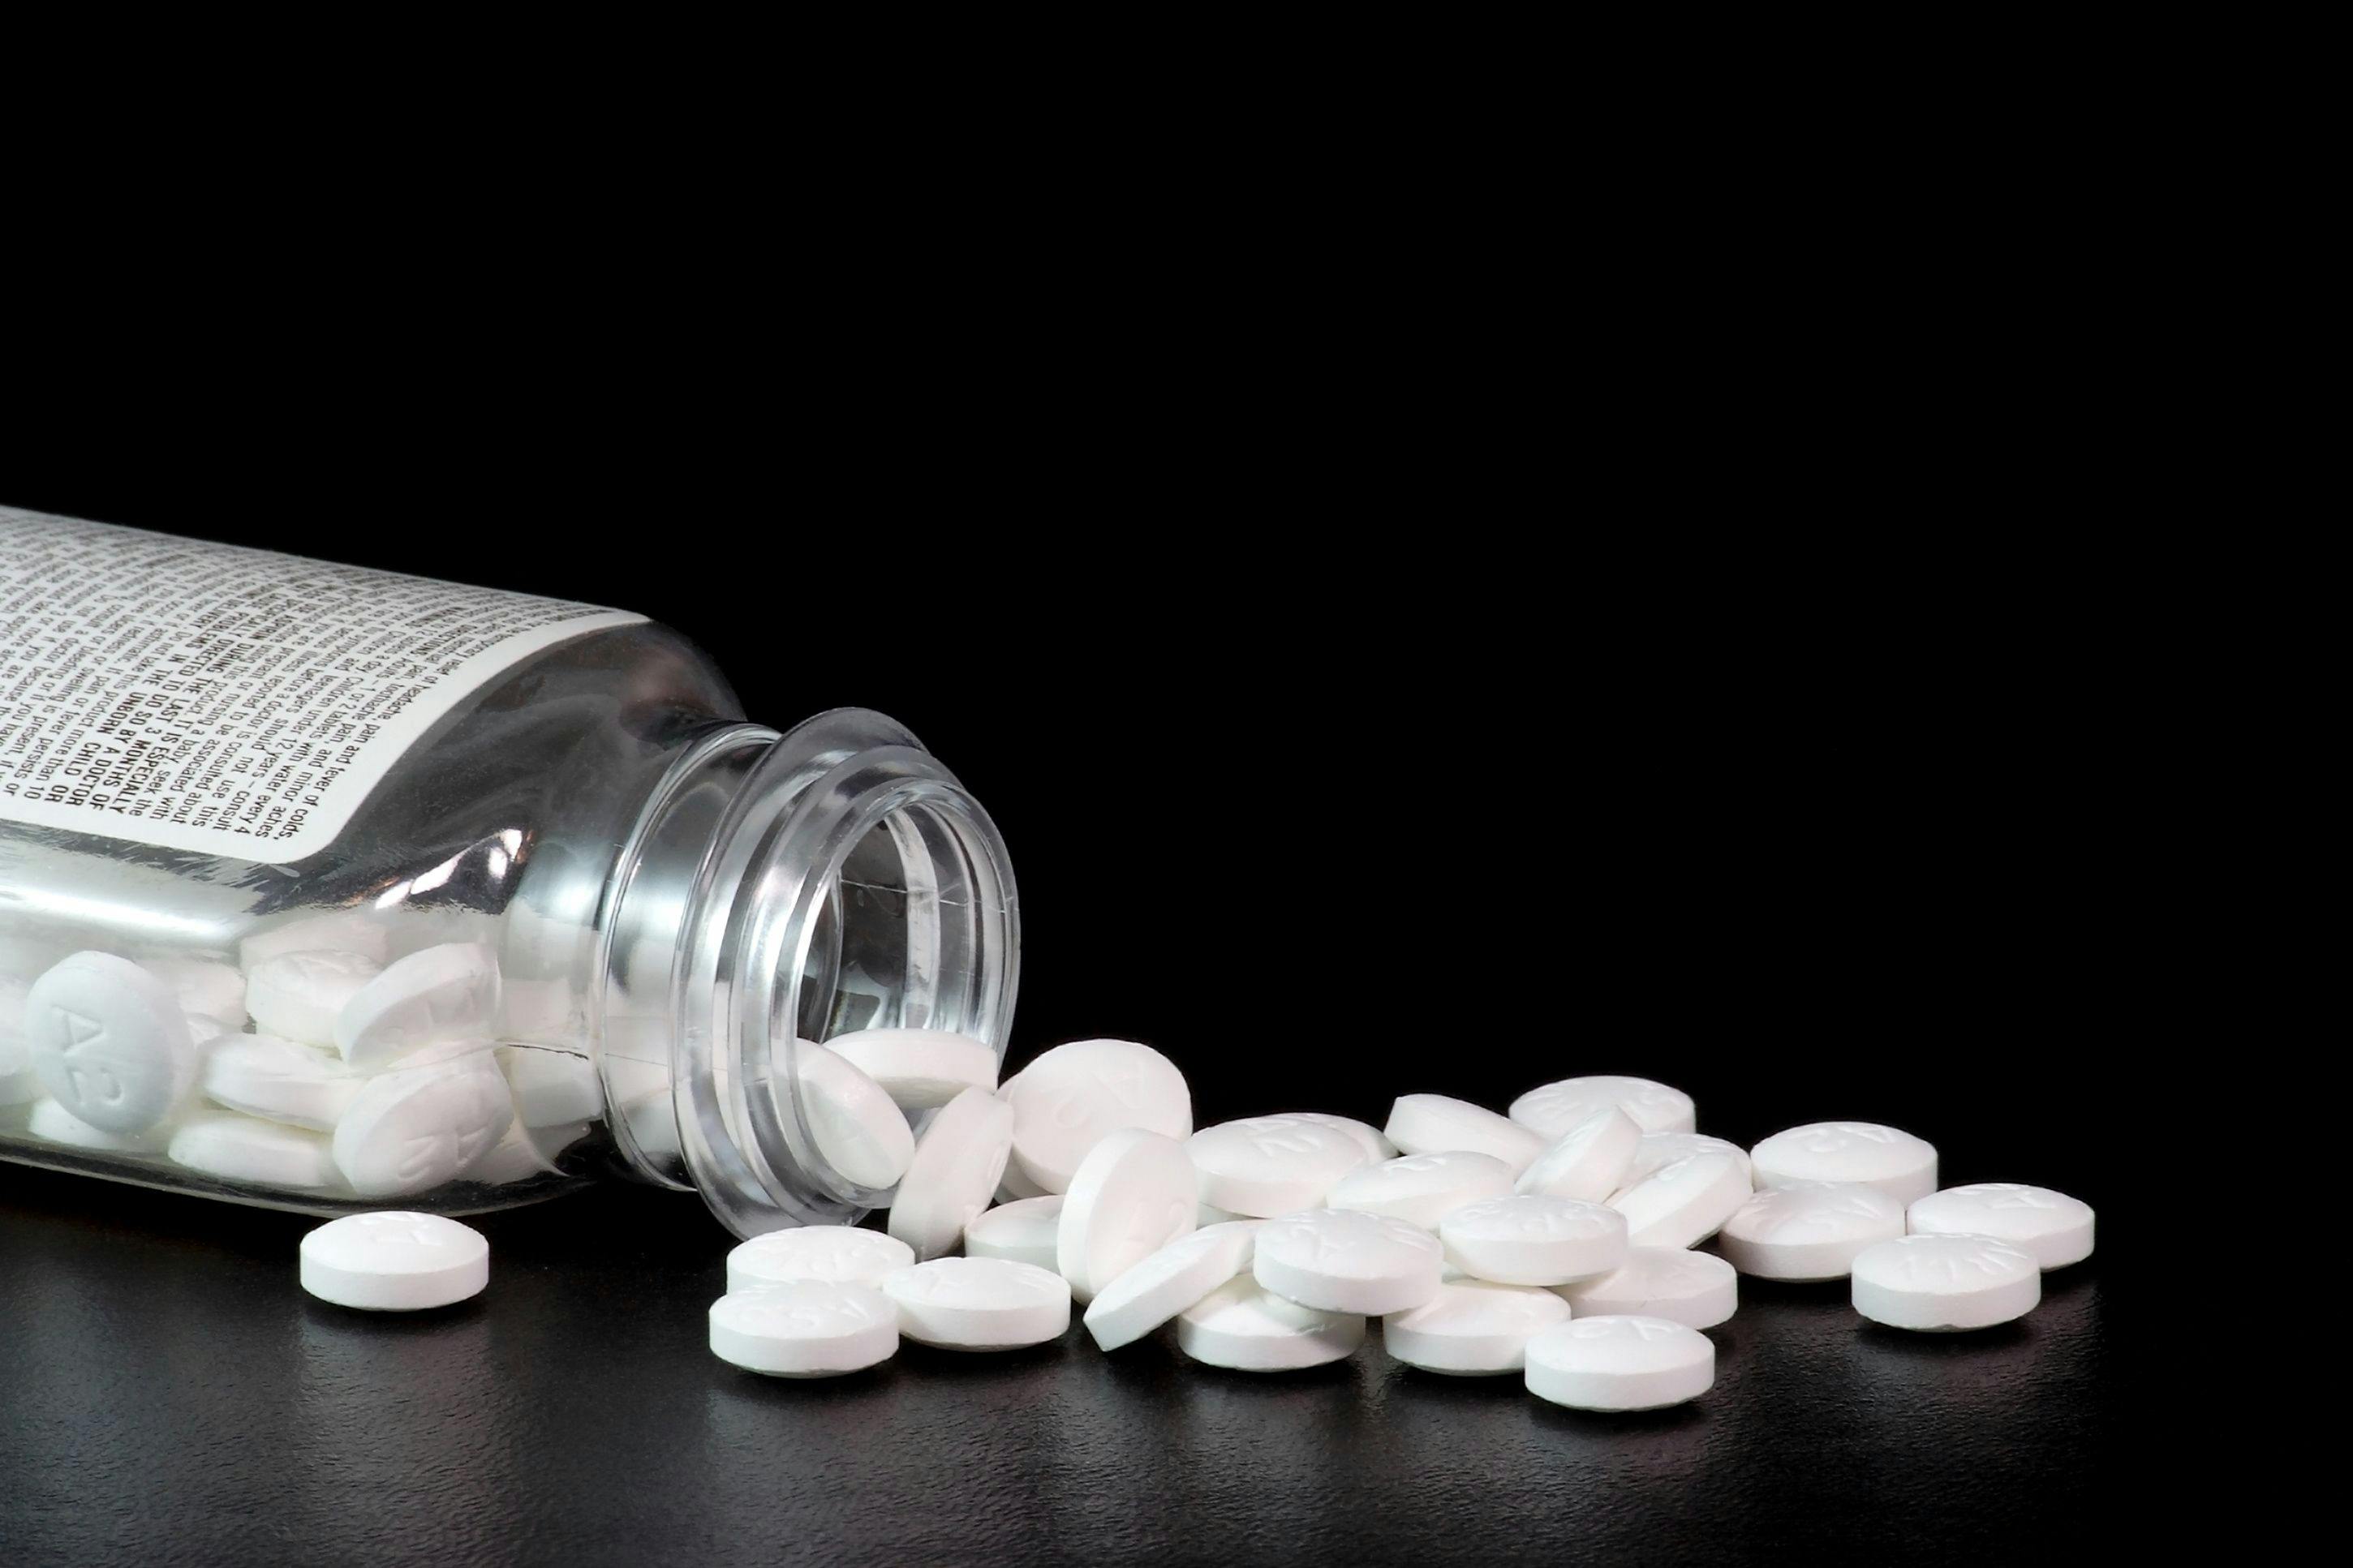 ASCEND: Aspirin Use Does Not Influence Dementia Risk in Patients with Diabetes